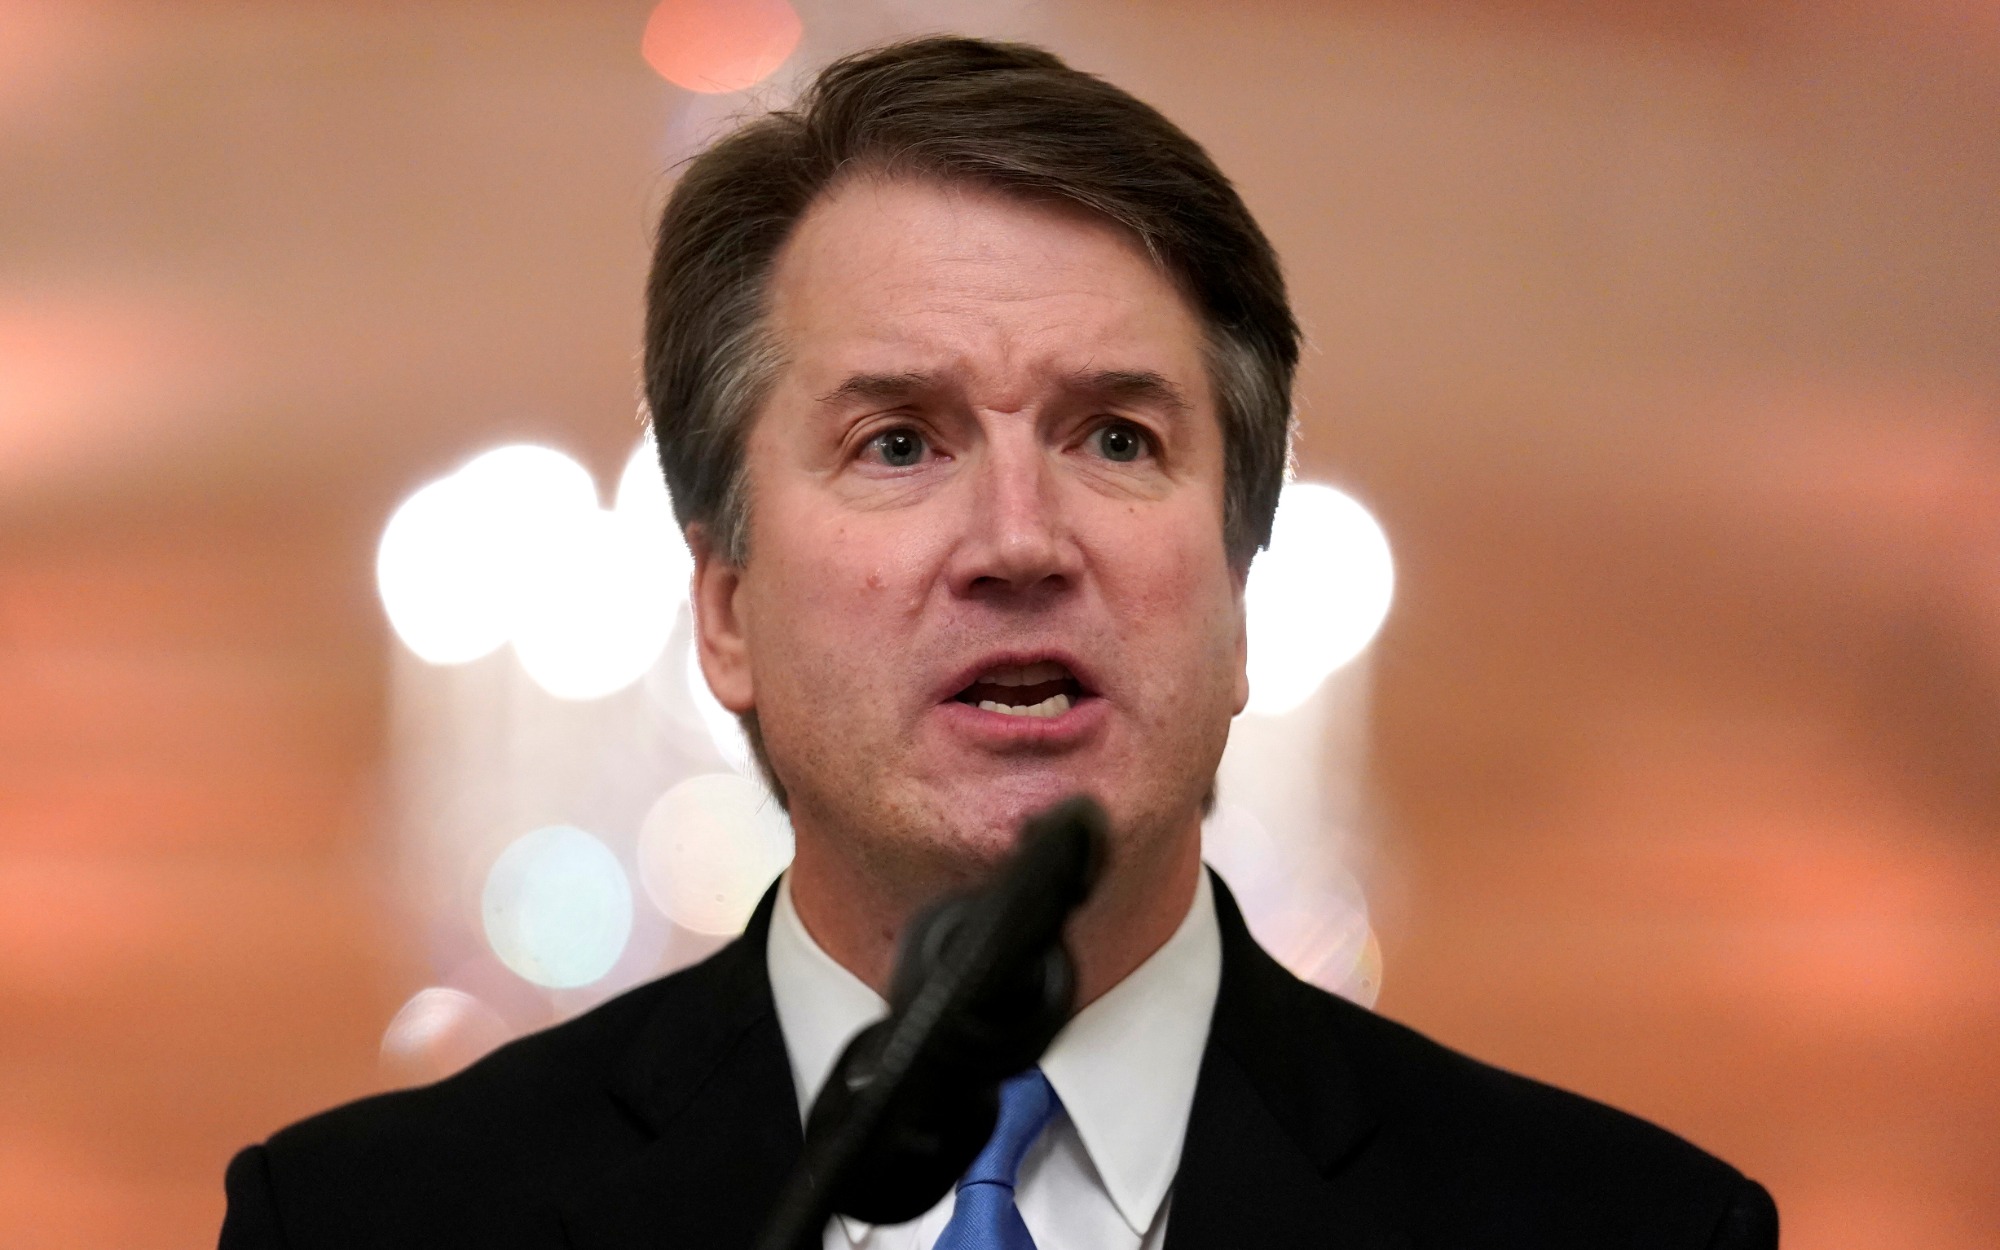 Brett Kavanaughs Supreme Court Confirmation Continues To Push The Pro Life Movement The